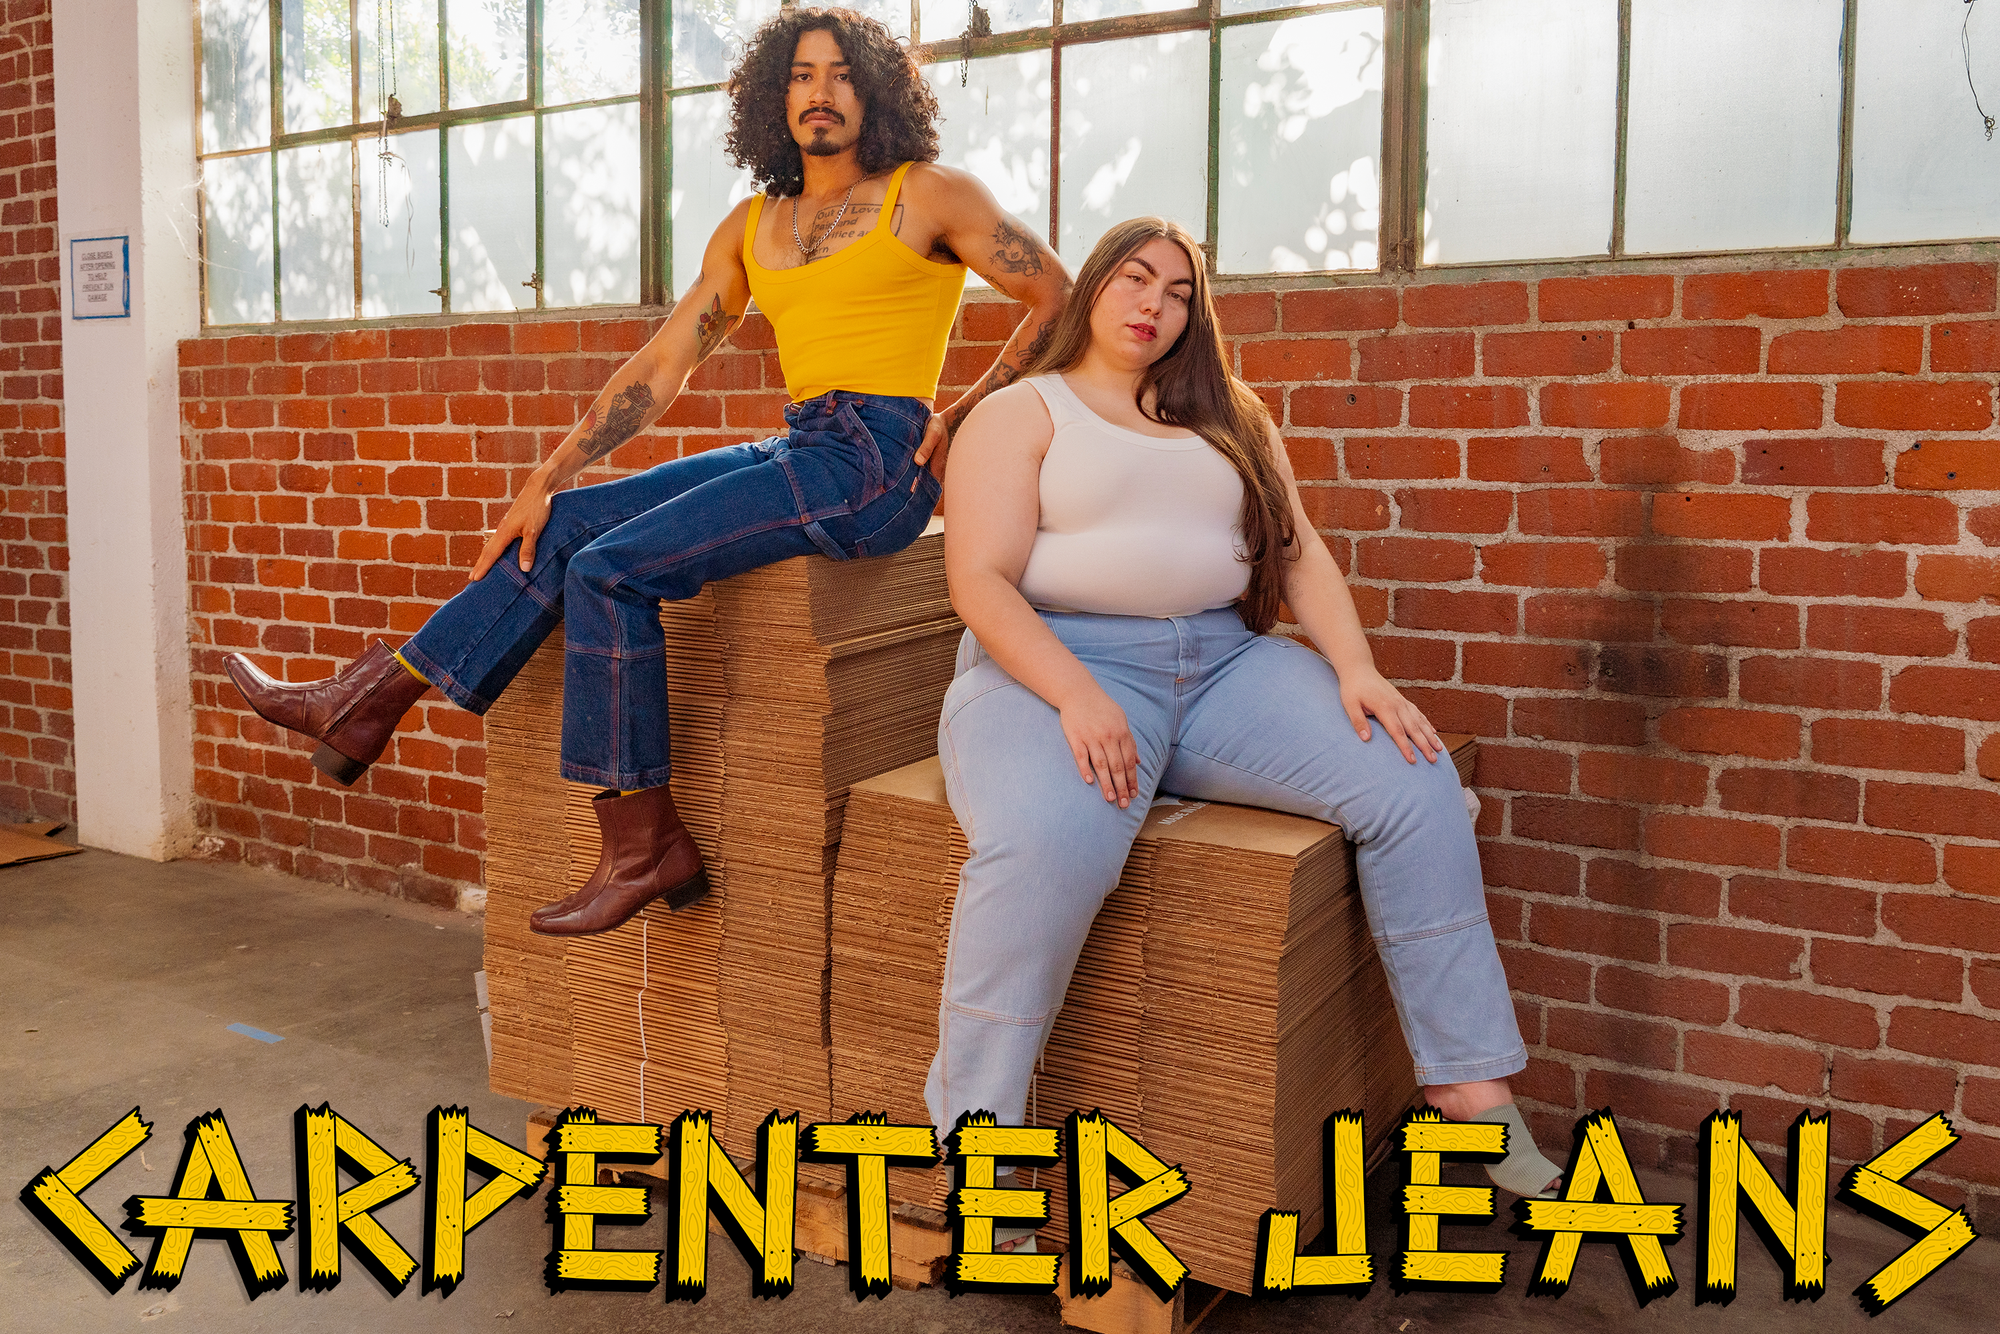 Jesse and Marielena are wearing Carpenter Jeans